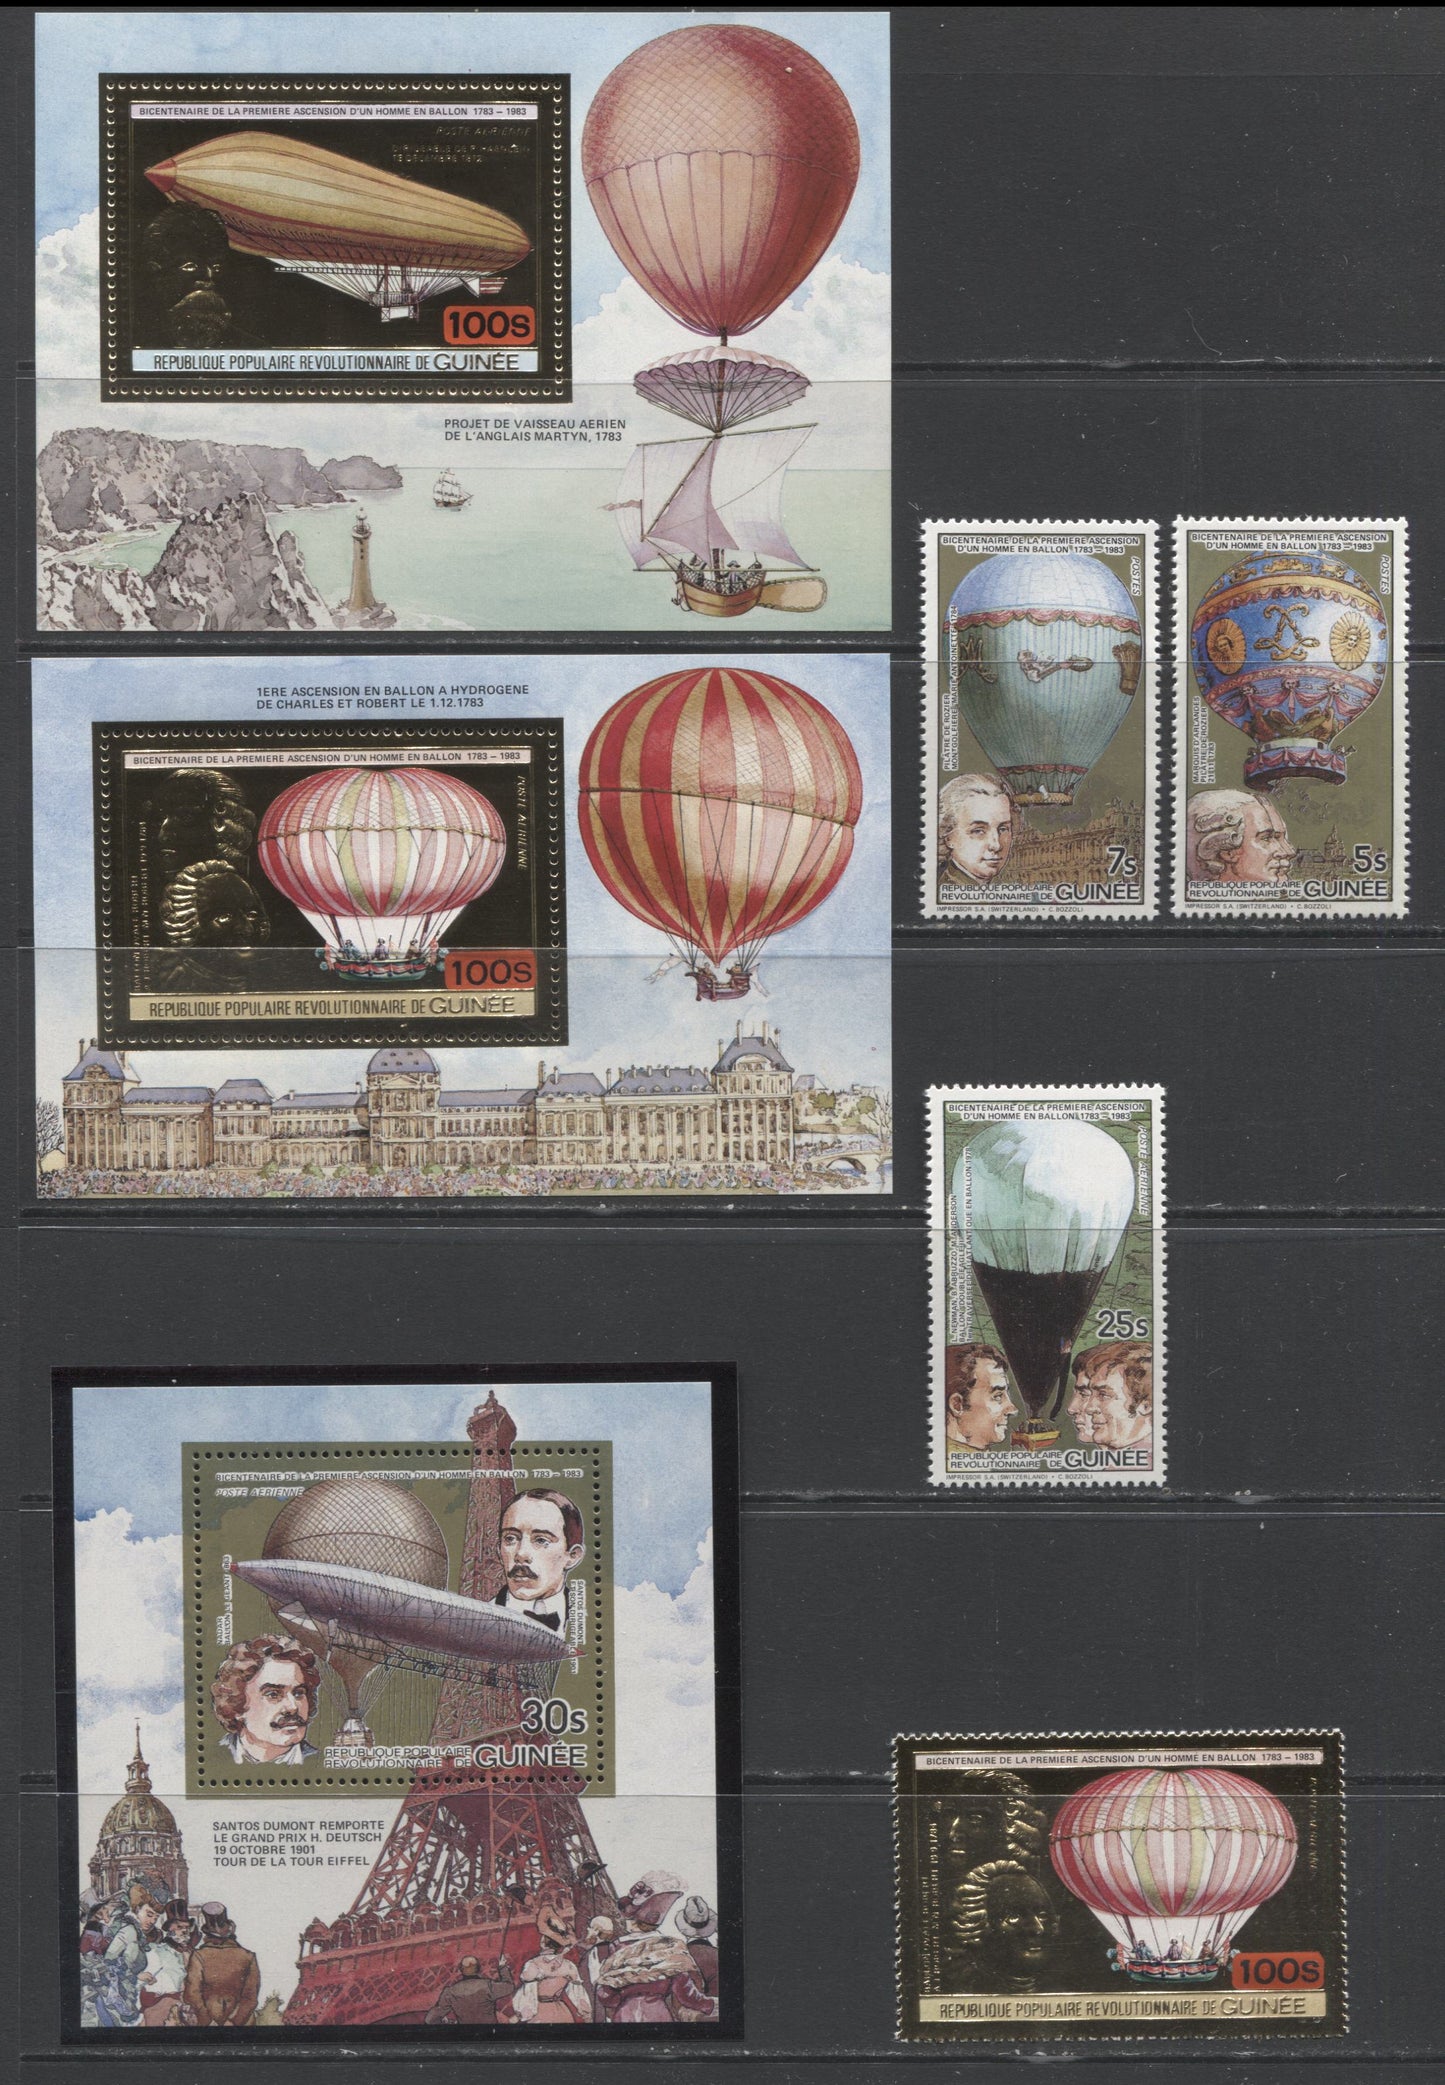 Lot 180 Guinea SC#846/C162 1983 Balloon Issue, A VFNH Range Of Perf & Imperf Singles & Souvenir Sheets + Unissued 100s Value, 2017 Scott Cat. $15 USD, Click on Listing to See ALL Pictures